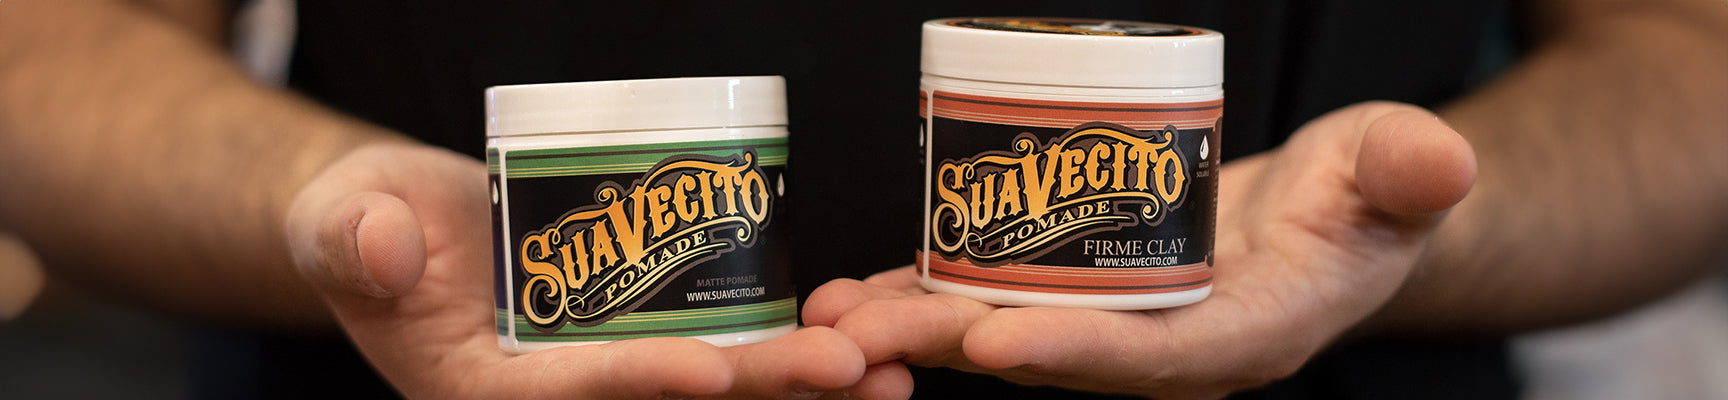 orignal hold pomade vs. firme clay